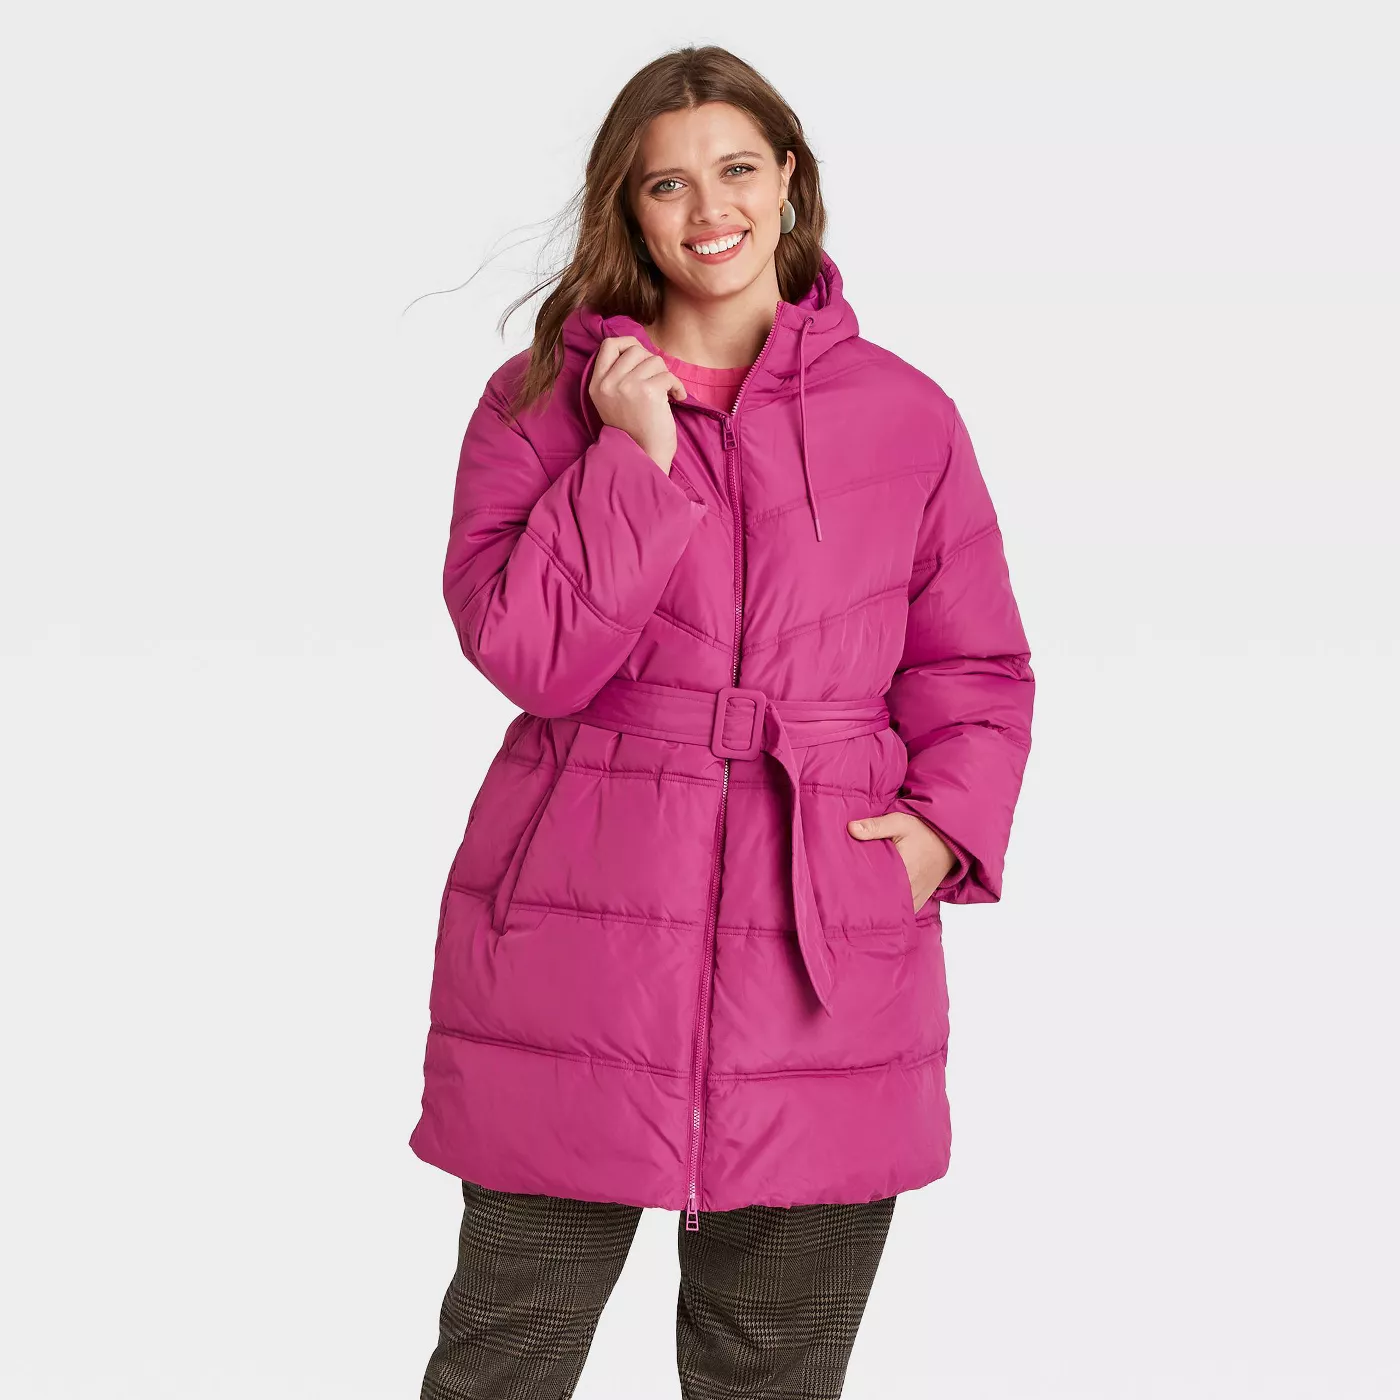 Women's Puffer Jacket - A New Day™ - image 1 of 4